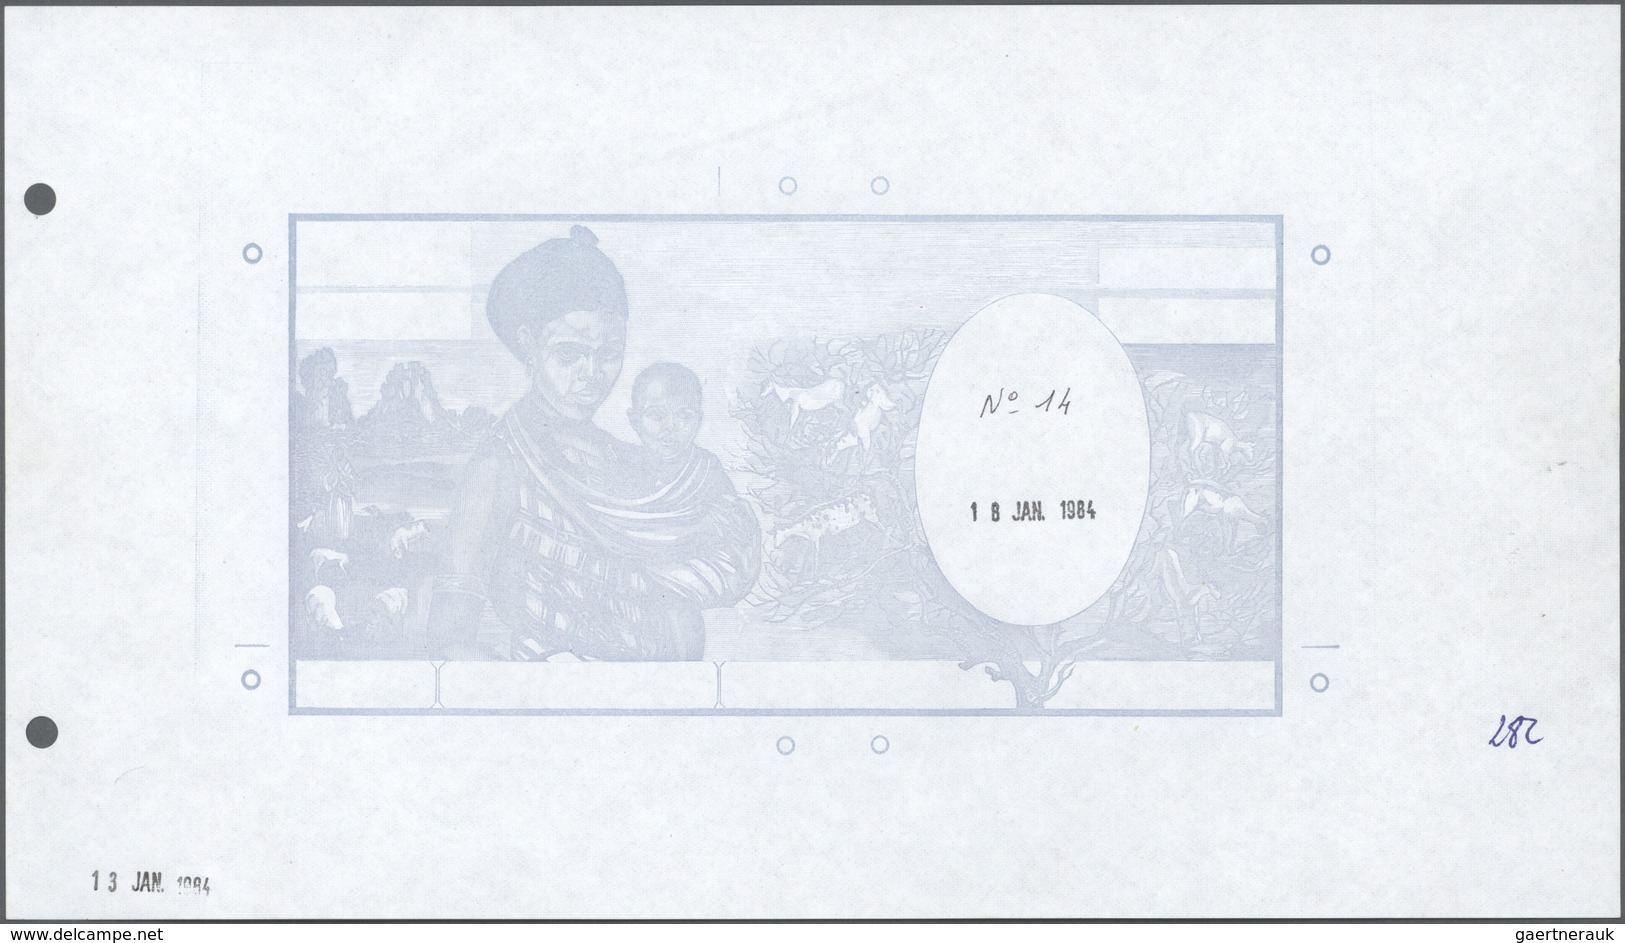 01373 Djibouti / Dschibuti: Highly Rare Archival Proof Print Of The Banque De France For The 10.000 Francs - Djibouti